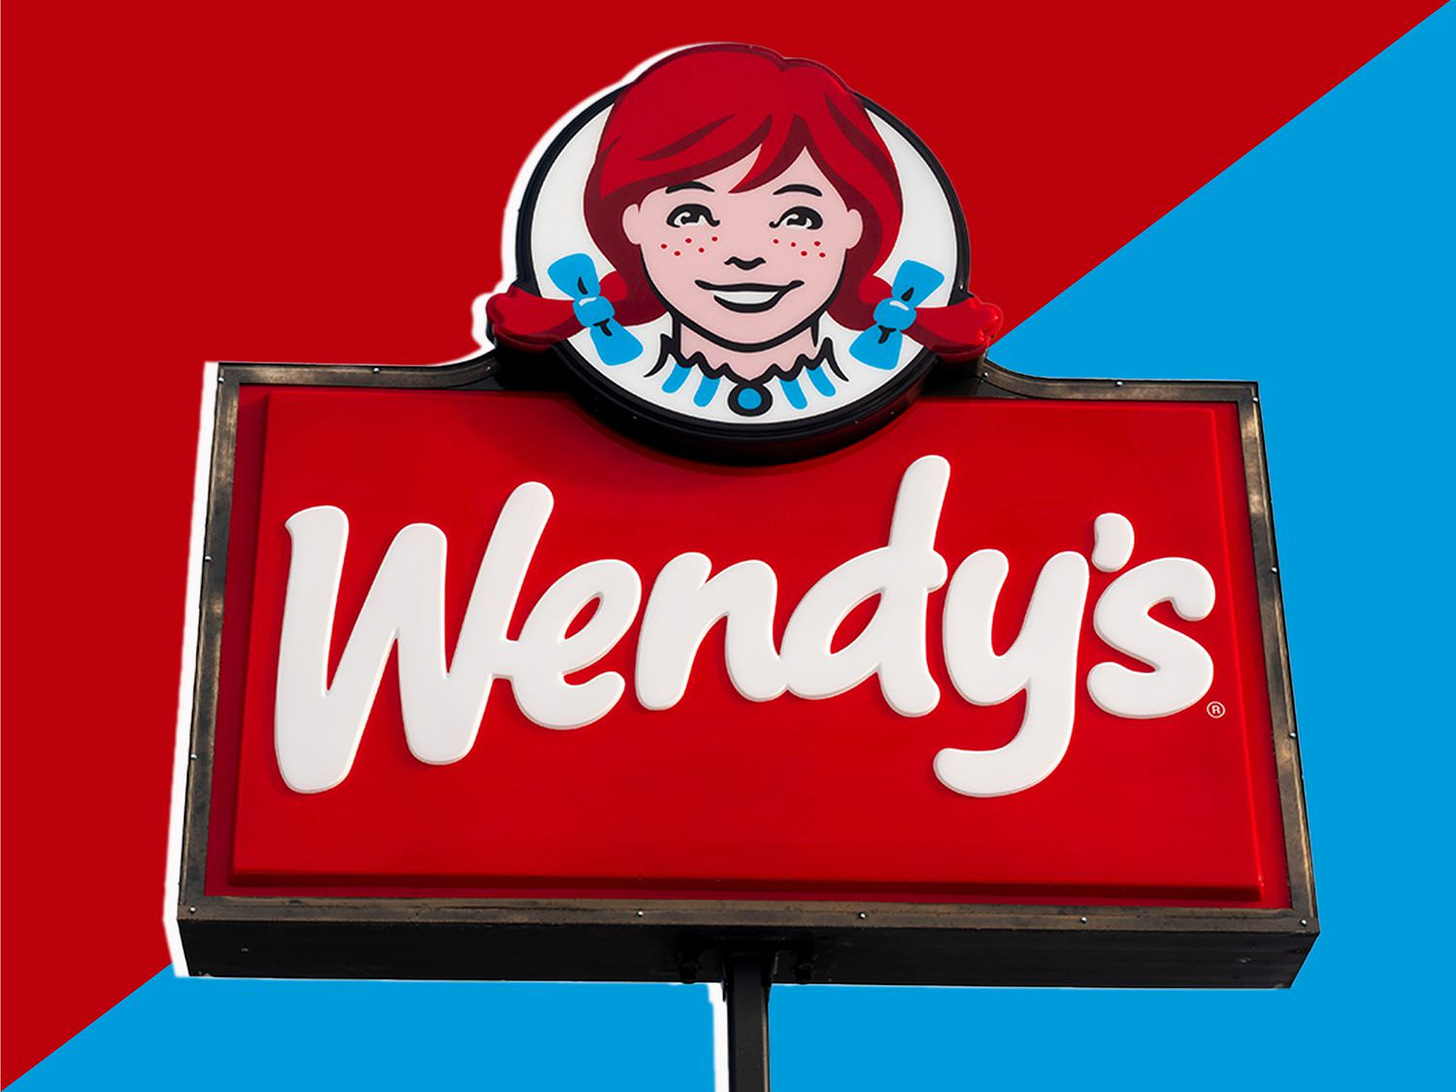 Leaked: Wendy's Has a New Sandwich Coming Soon